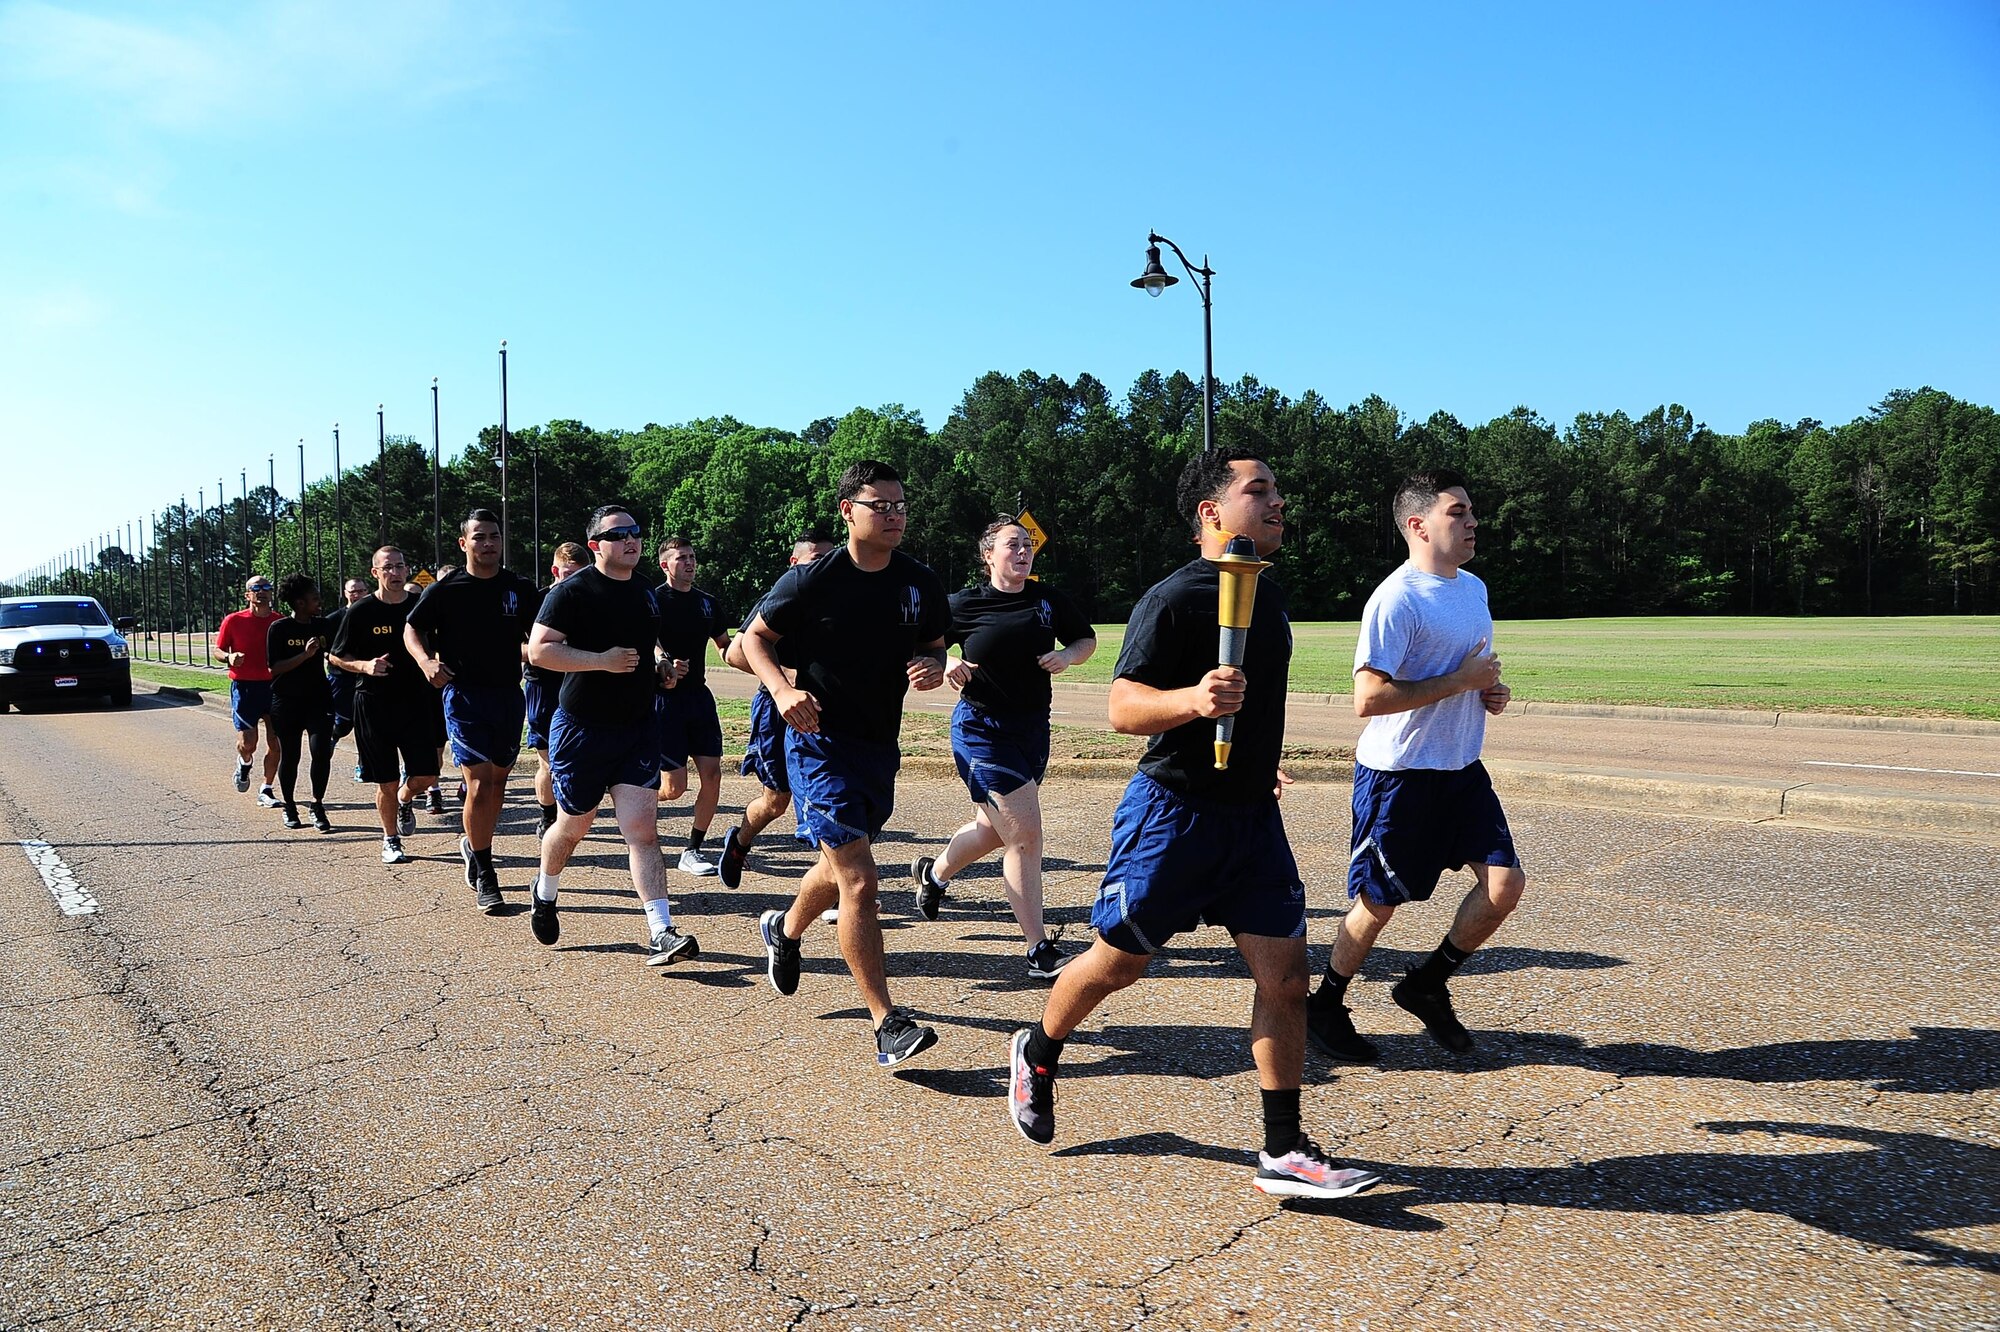 The 14th Security Forces Squadron participates in the 2017 Special Olympics Torch Run May 16, 2017, at Columbus Air Force Base, Mississippi. The Defenders ran two miles through the base and then passed the torch to the Columbus Police Department who then ran the torch through the city of Columbus. (U.S. Air Force photo by Airman 1st Class Beaux Hebert)